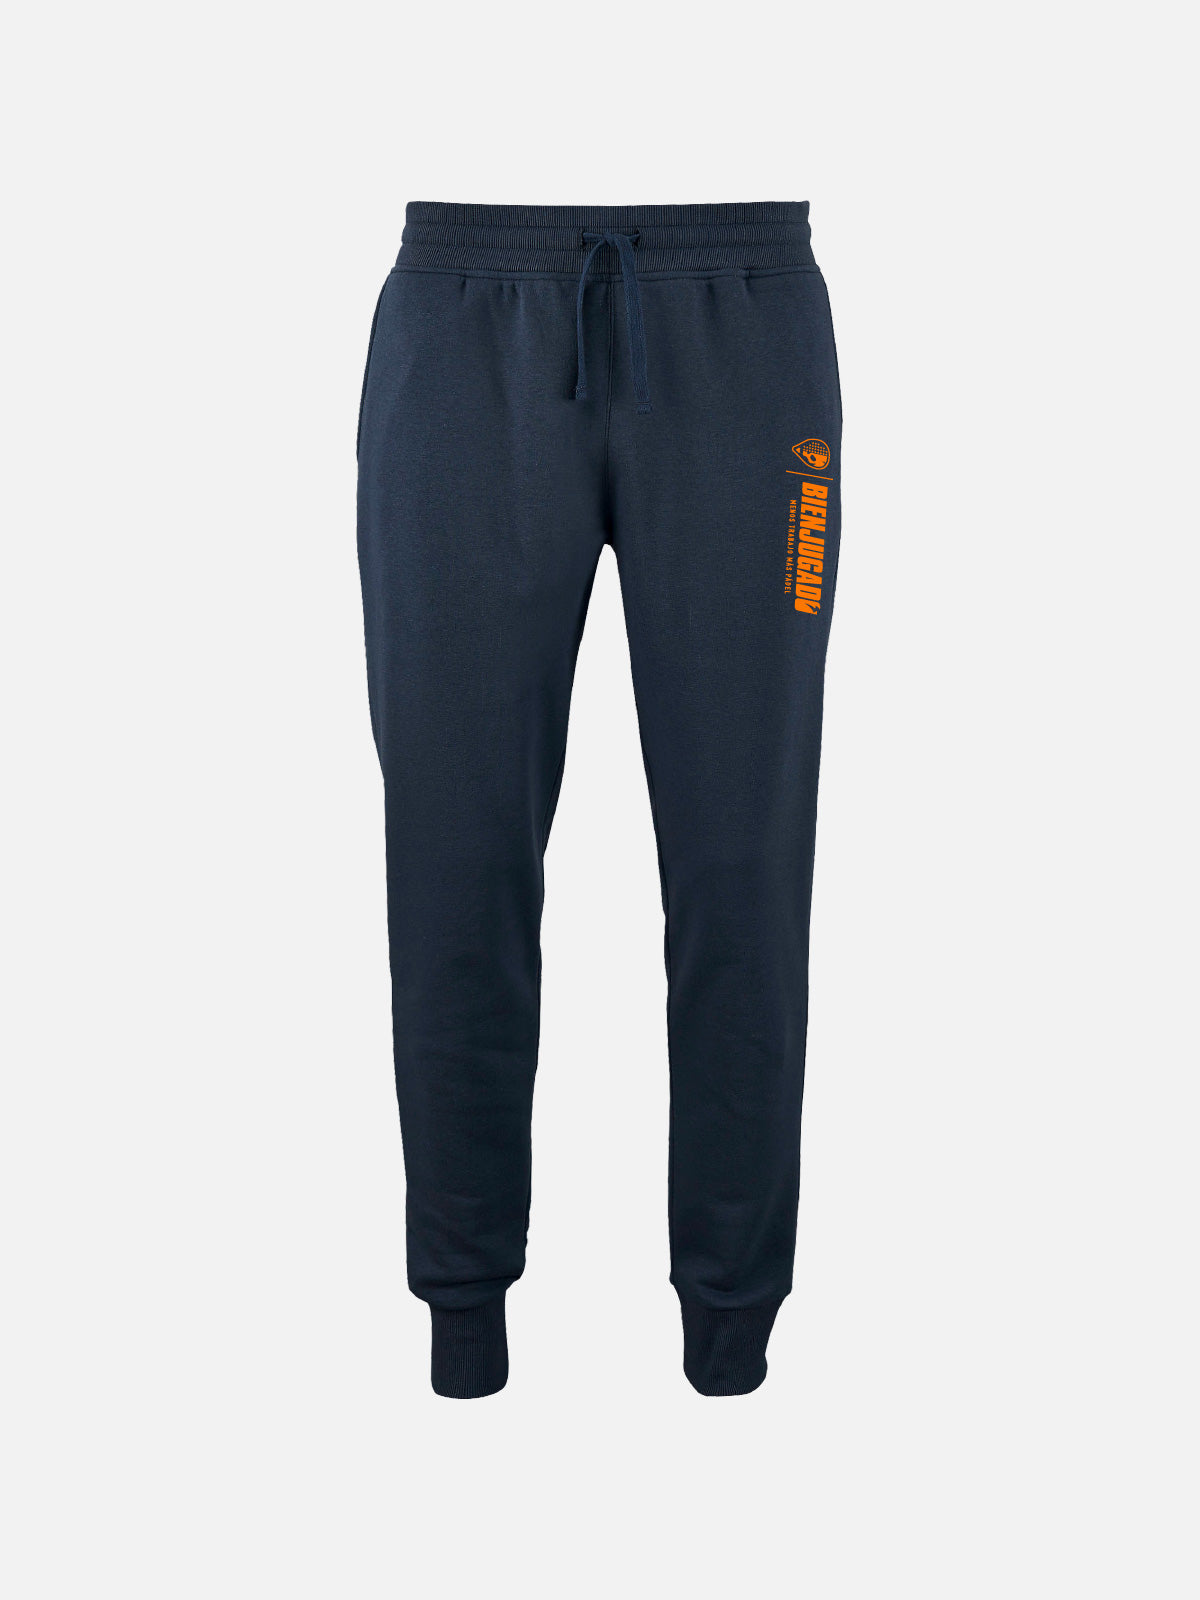 Iconic Women'S Trousers - Navy